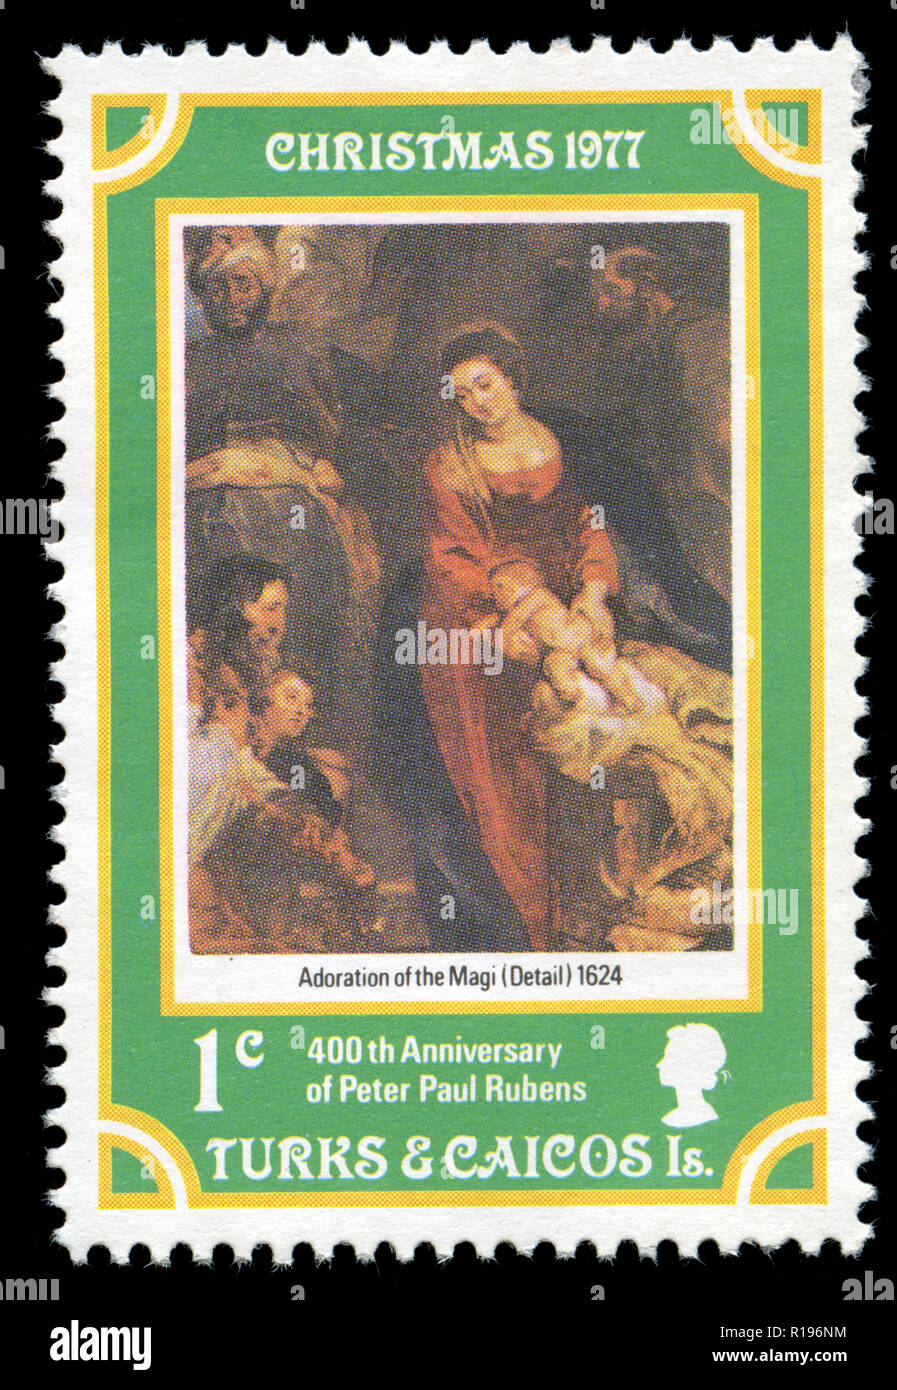 Postage stamps from the Turks and Caicos Islands in the Christmas 1977 series, 400th Anniversary of Peter Paul Rubens Stock Photo